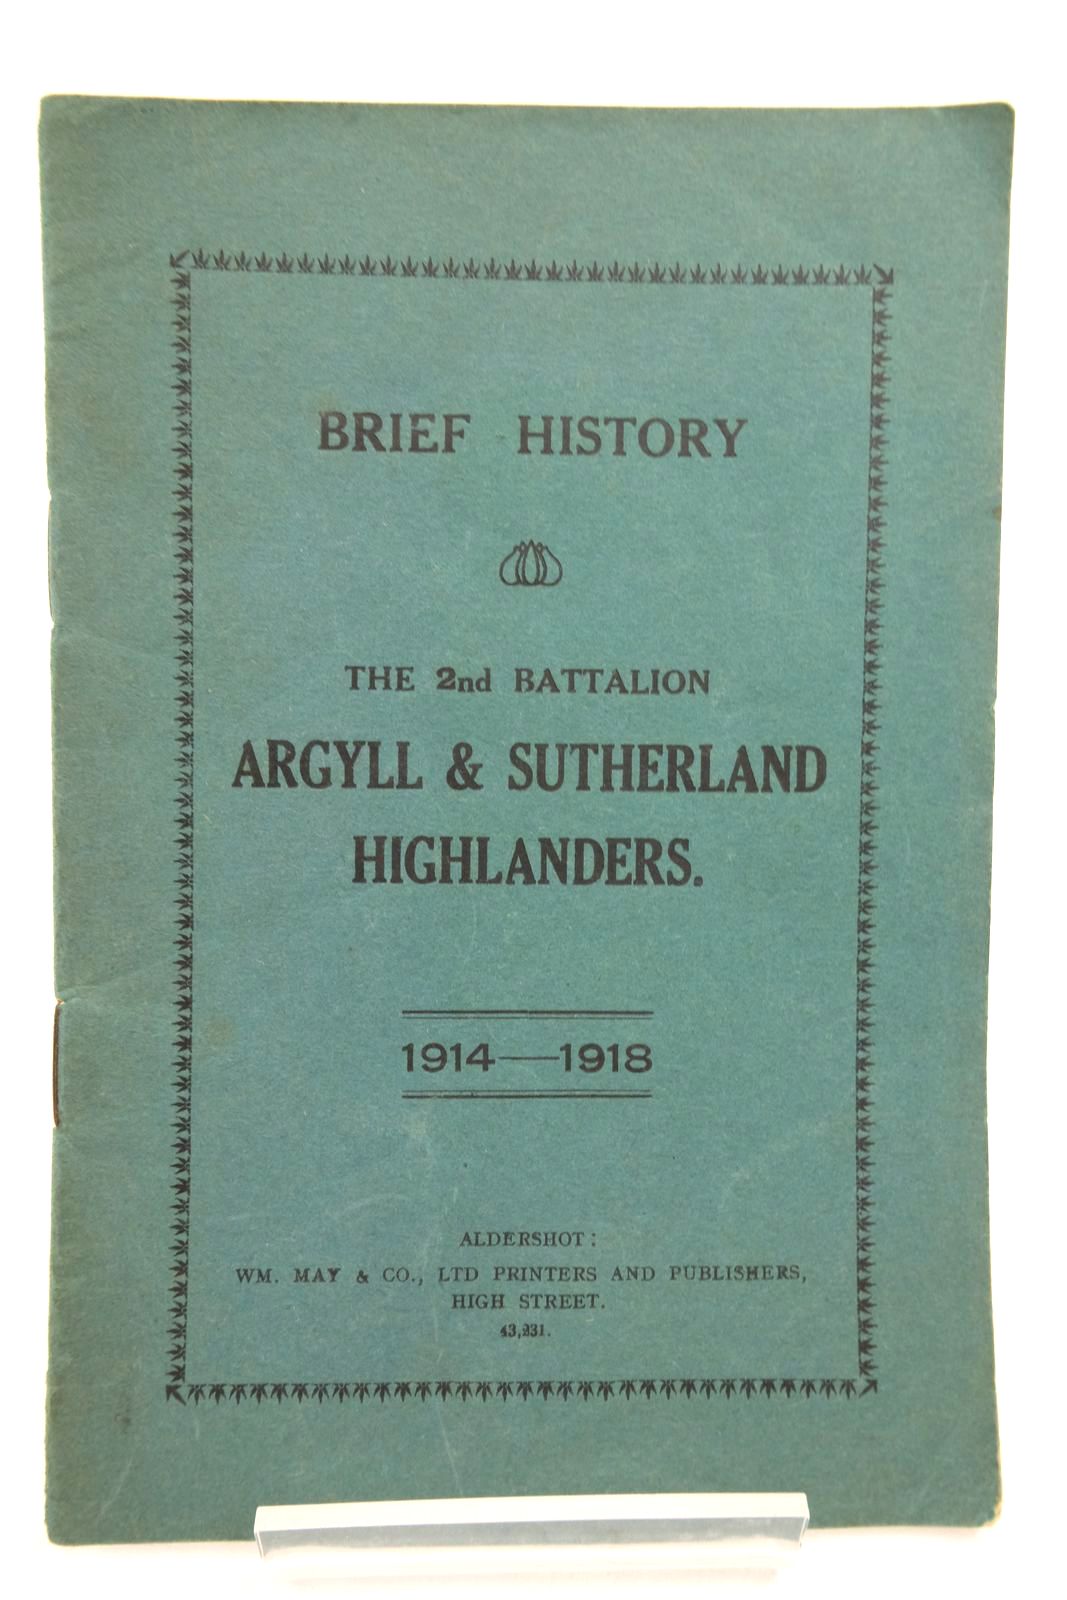 Photo of THE 2ND BATTALION ARGYLL AND SUTHERLAND HIGHLANDERS: 1914-1918 published by Wm. May & Co. Ltd. (STOCK CODE: 2137683)  for sale by Stella & Rose's Books